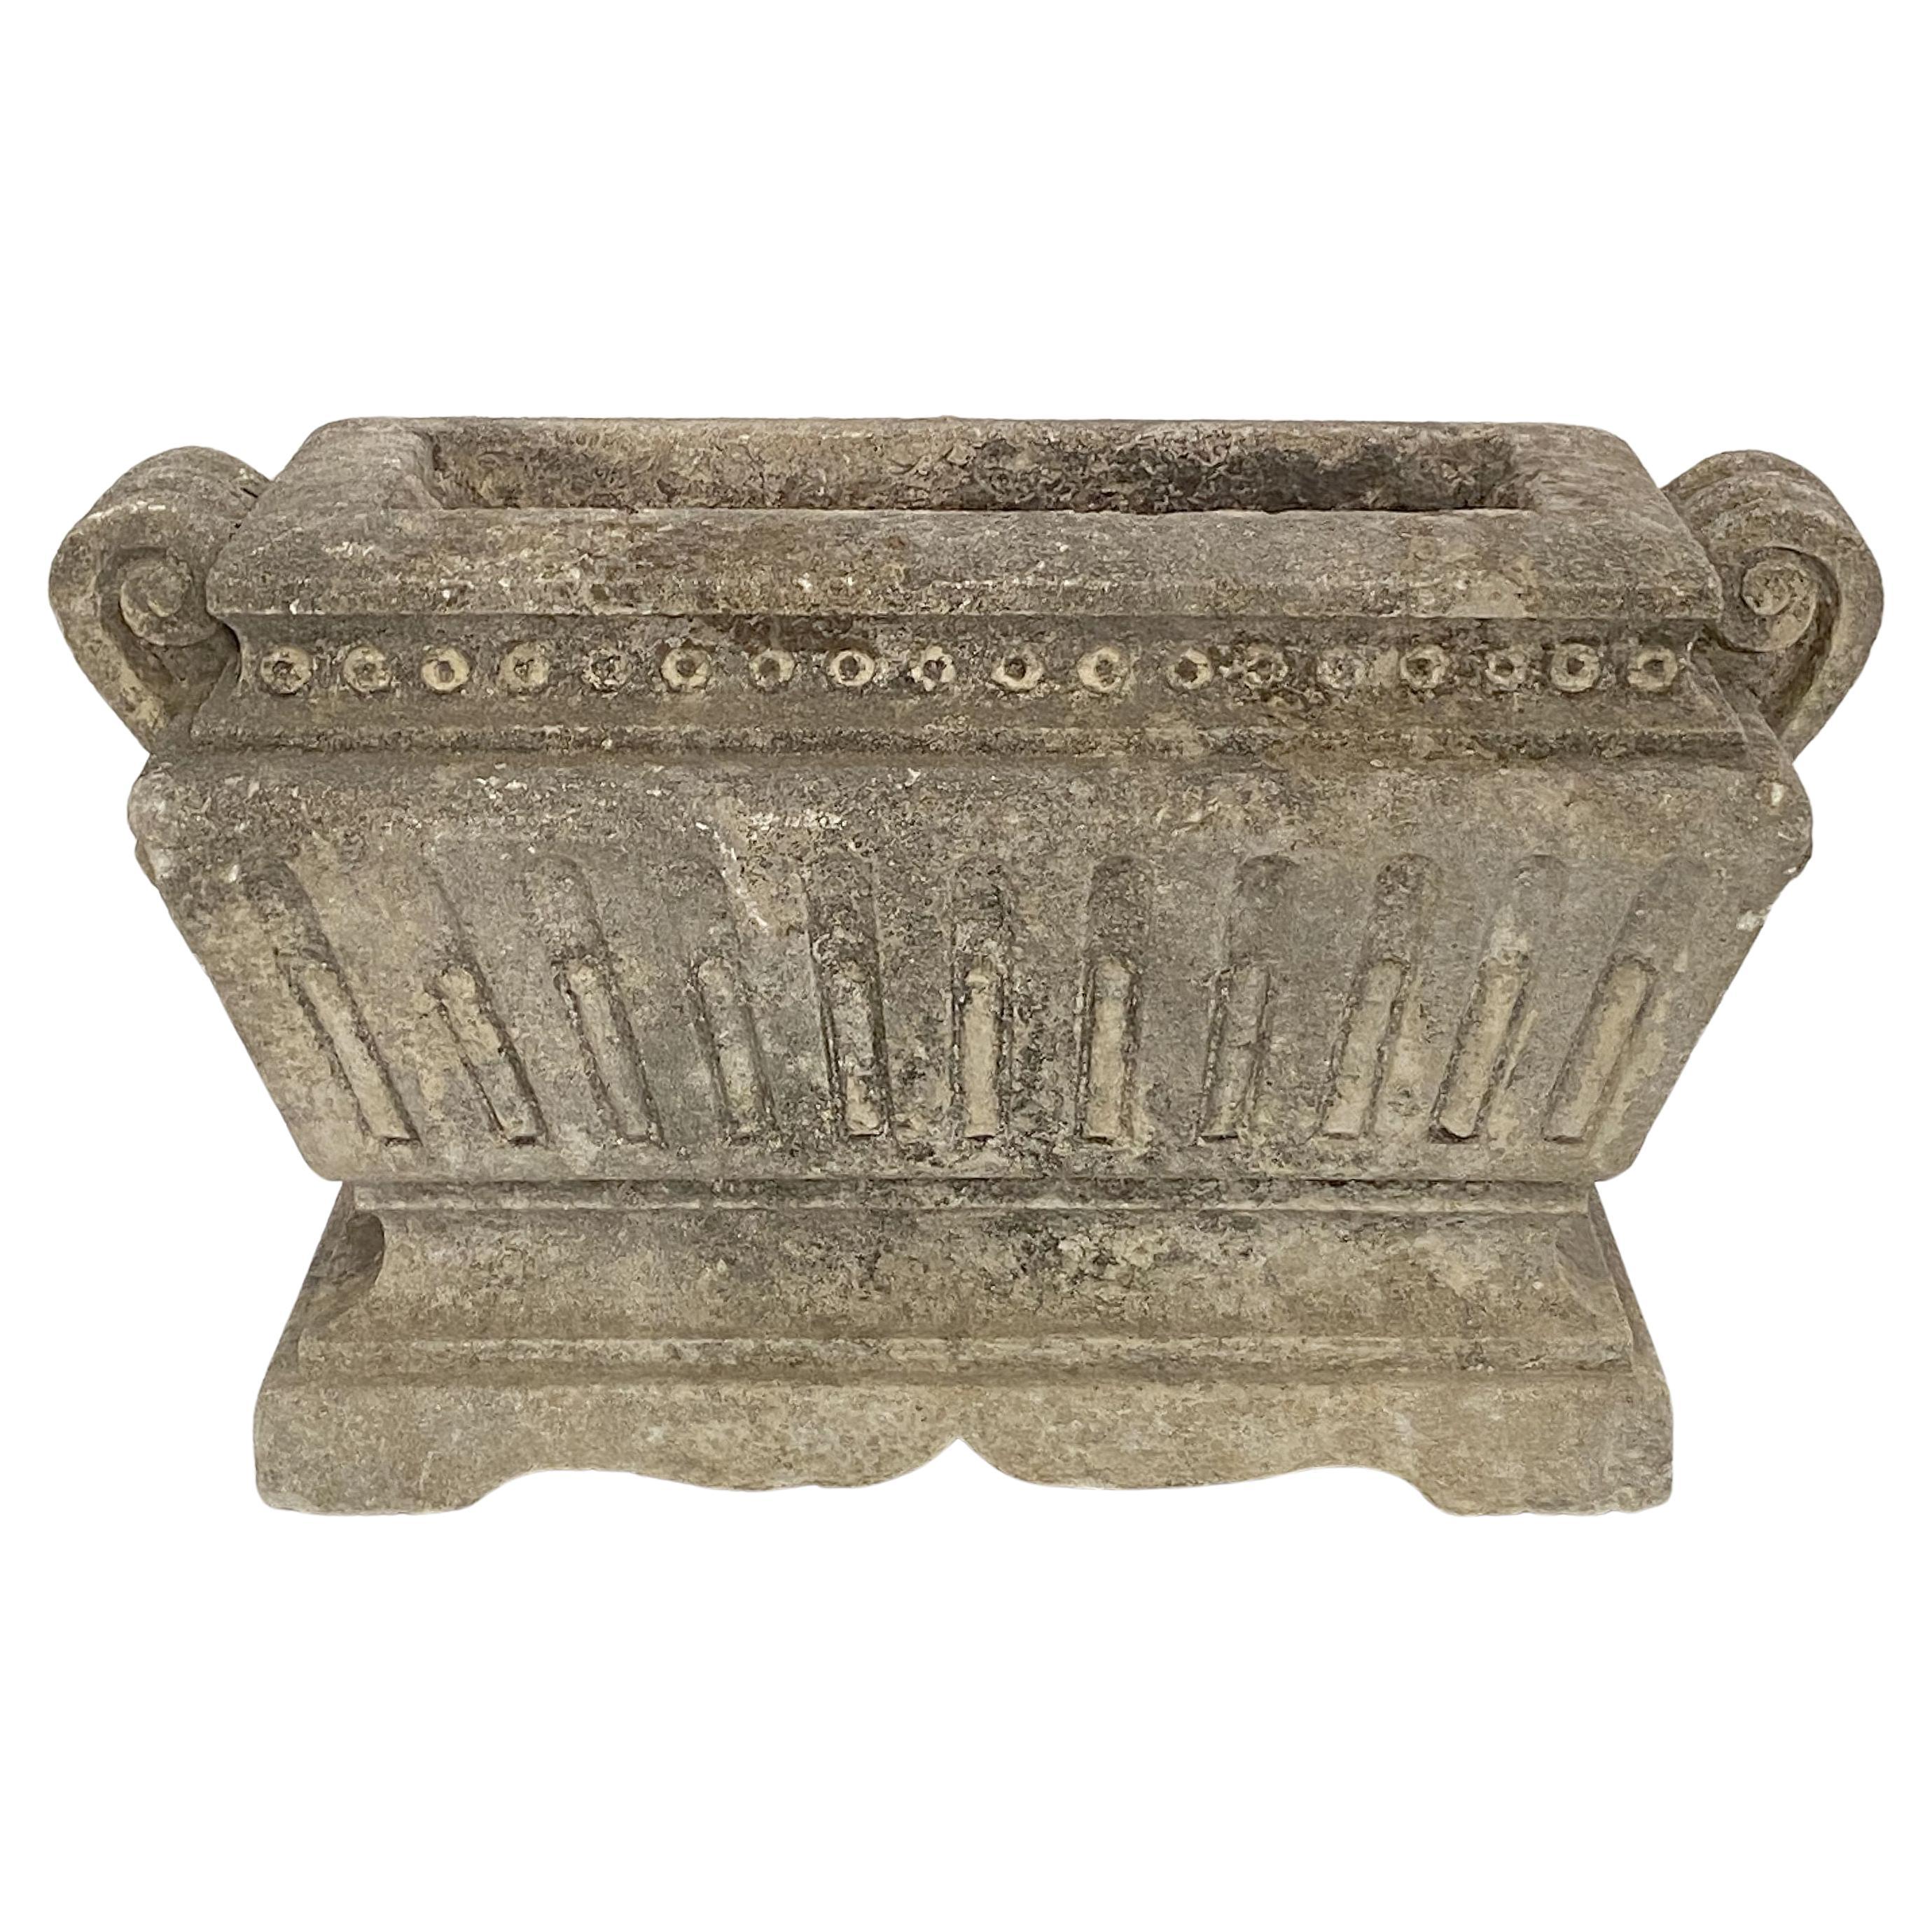 Large Rectangular Garden Stone Trough or Planter from England For Sale